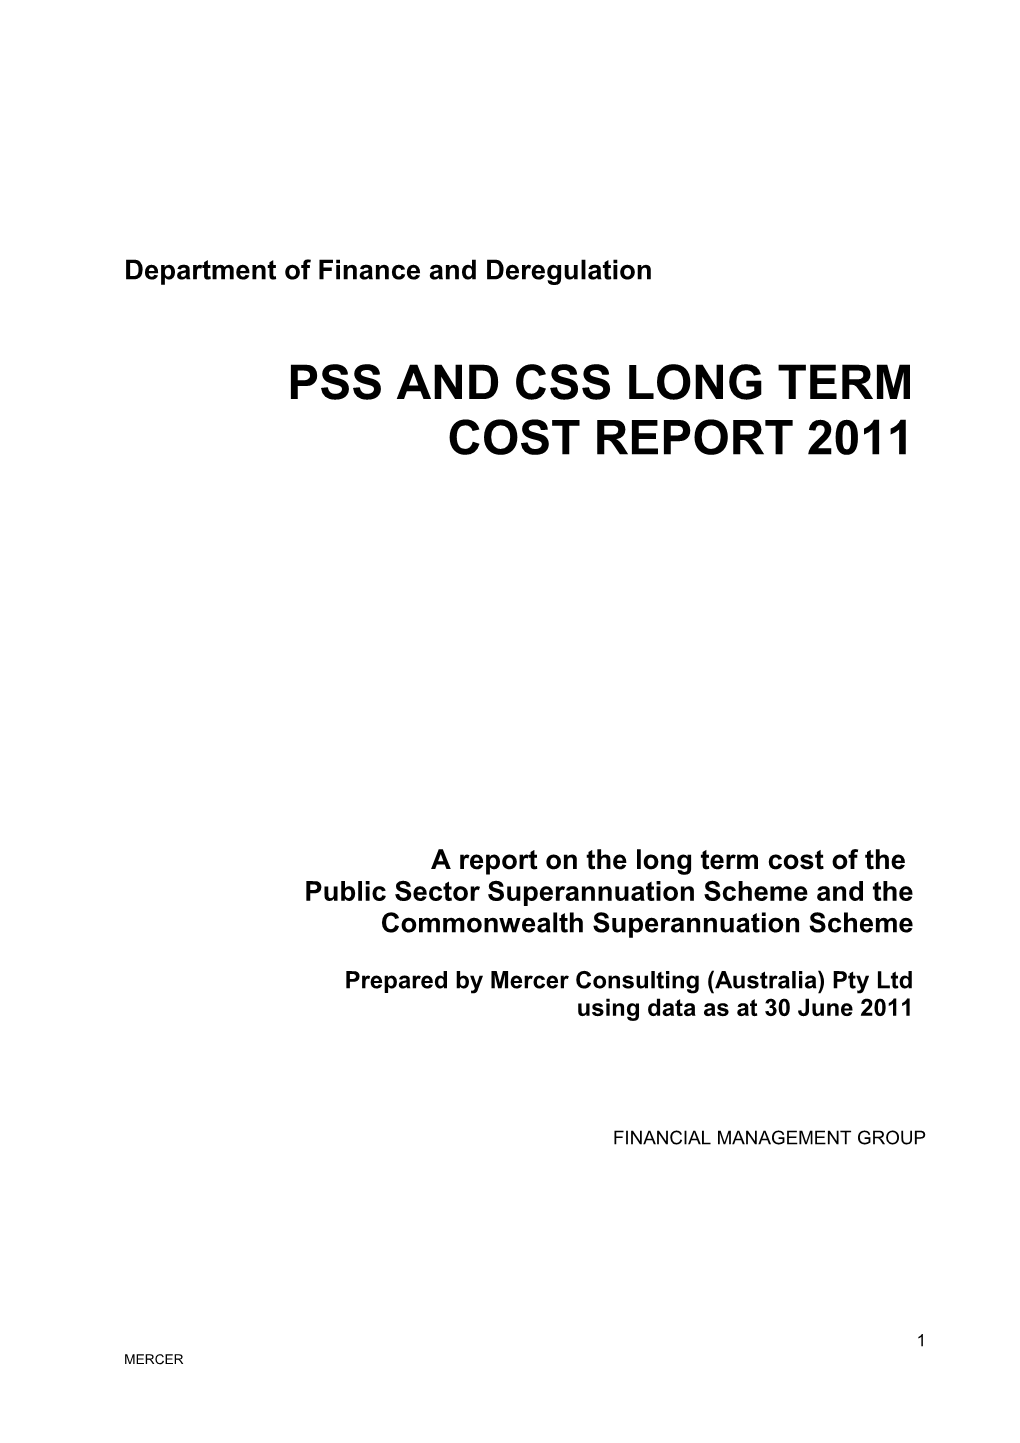 PSS and CSS Long Term Cost Report 2011